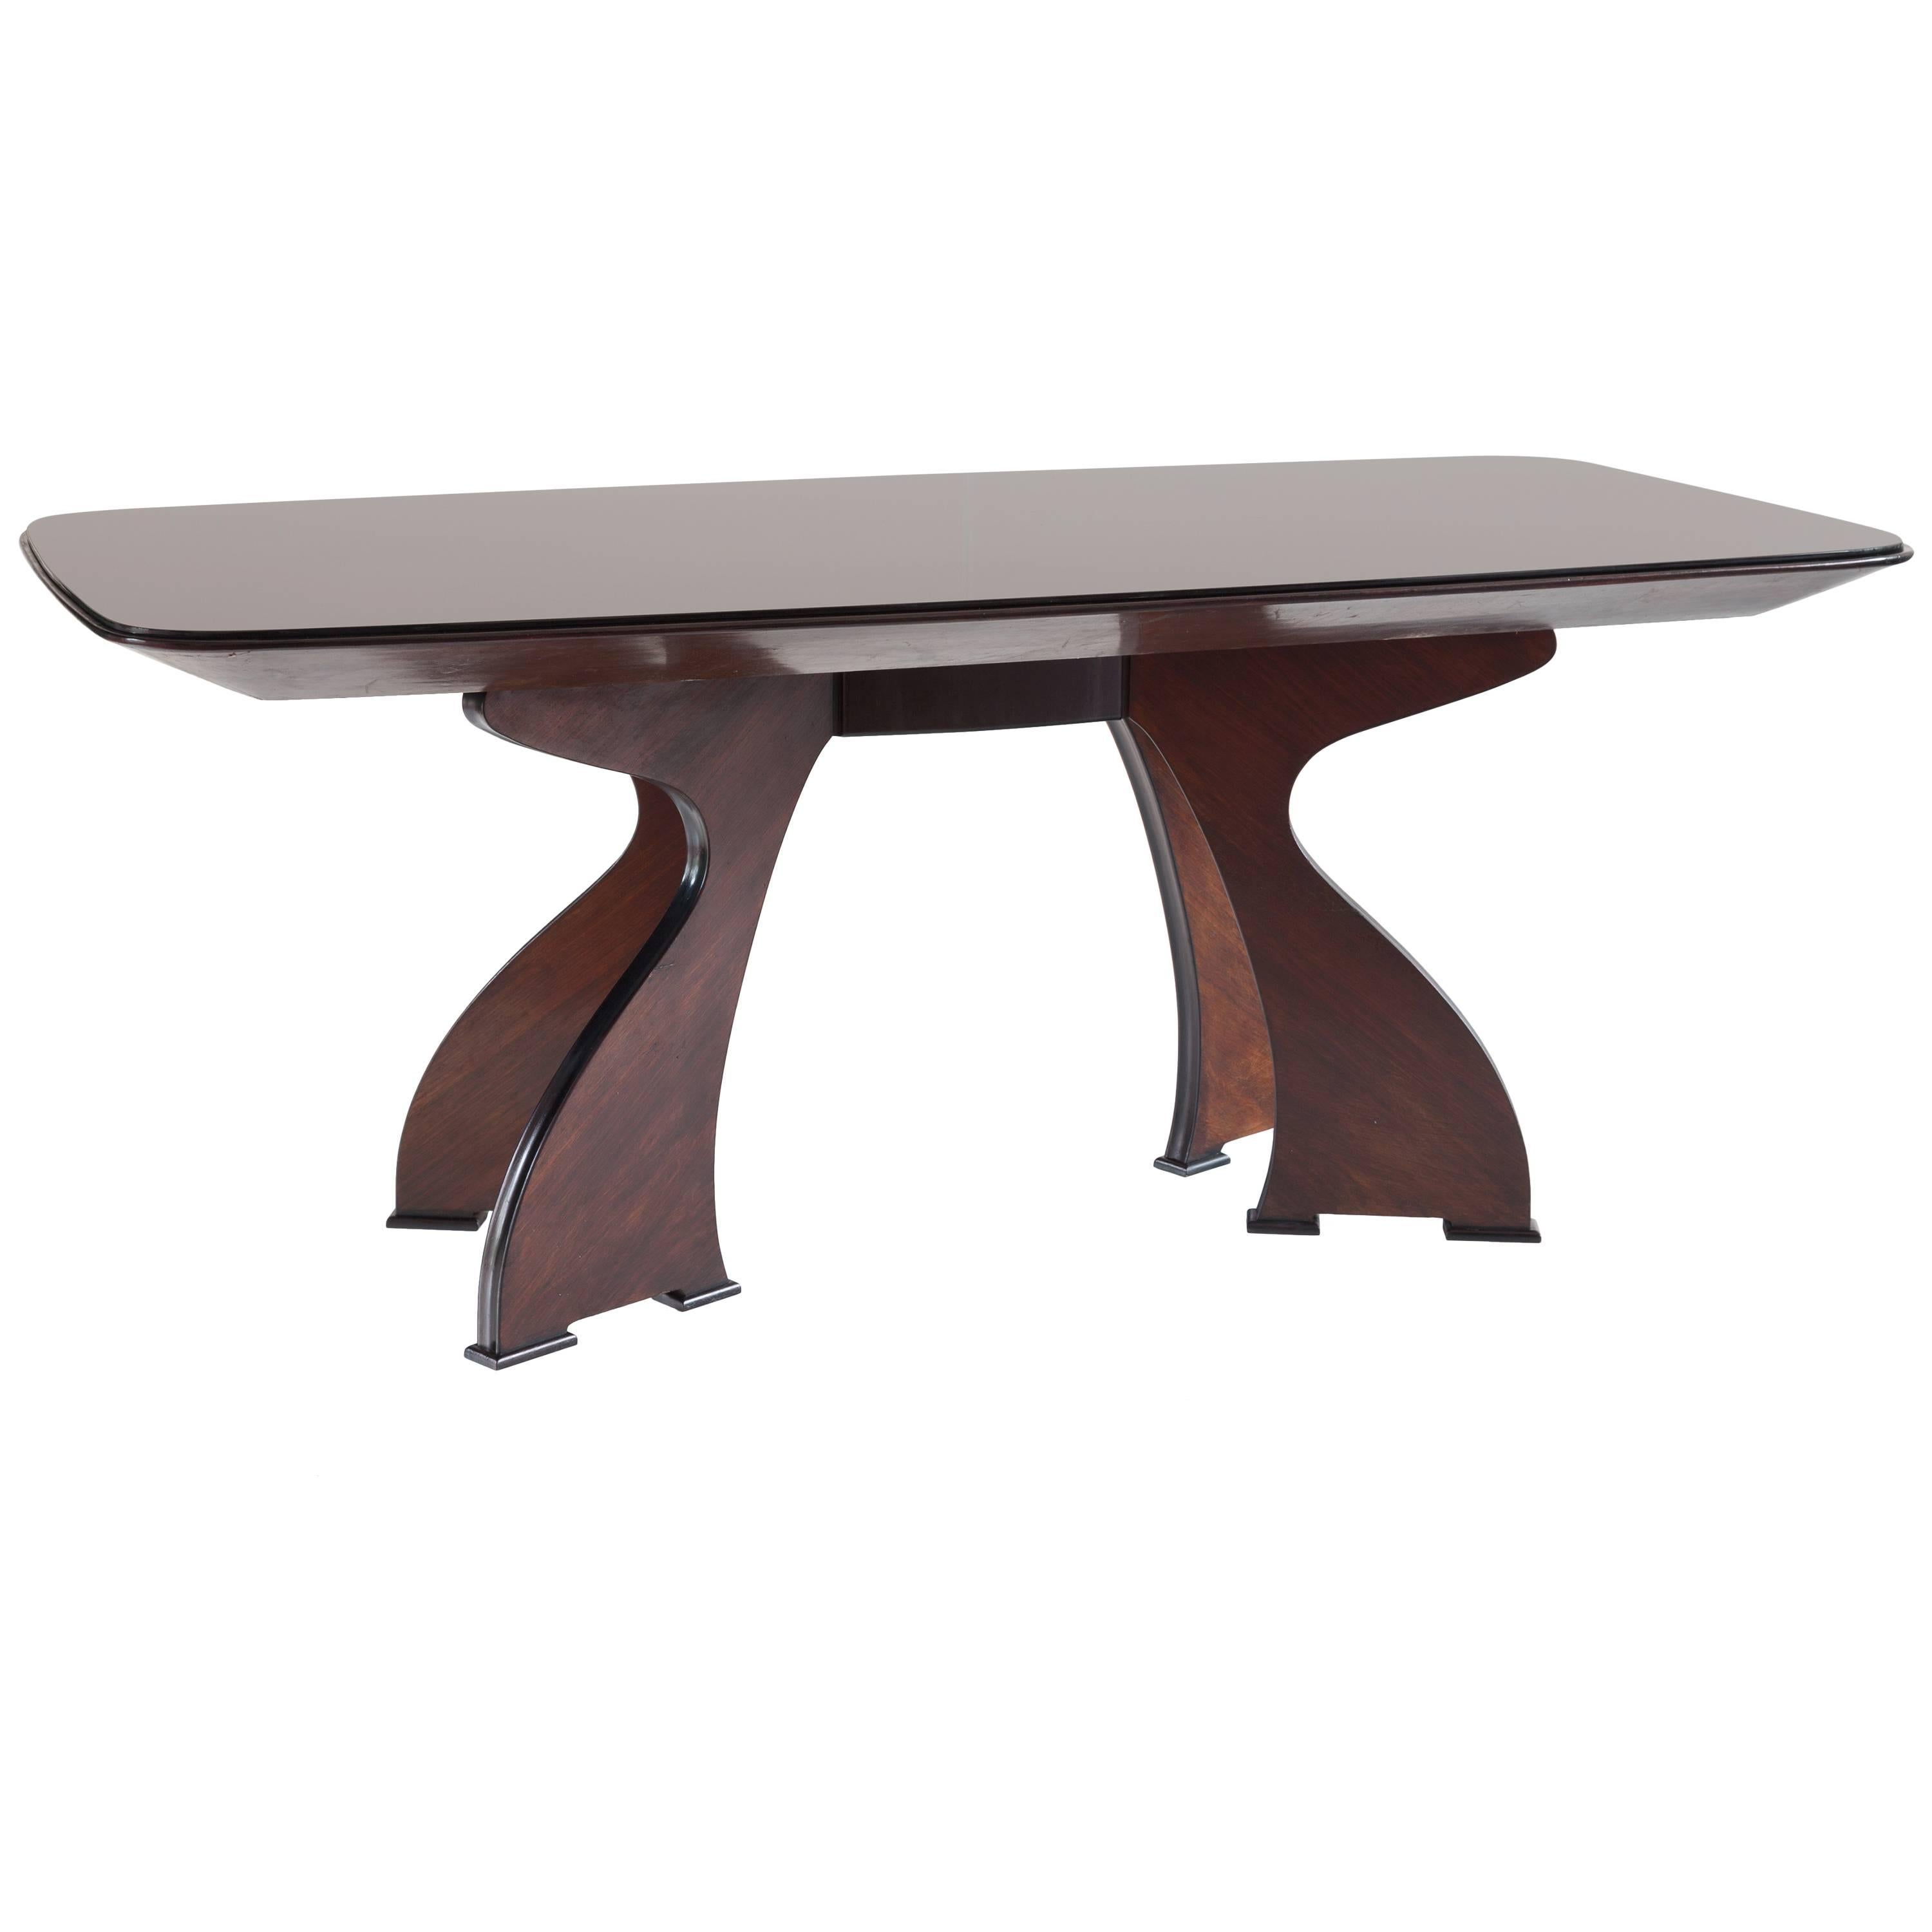 Stunning Italian modern dining table, circa 1940.
Unique piece in the style of Guglielmo Ulrich.
Very good original condition
Rosewood, rare black opaline glass top
ebonized details.
Measures: H 82 cm 200 x 96 cm.
 